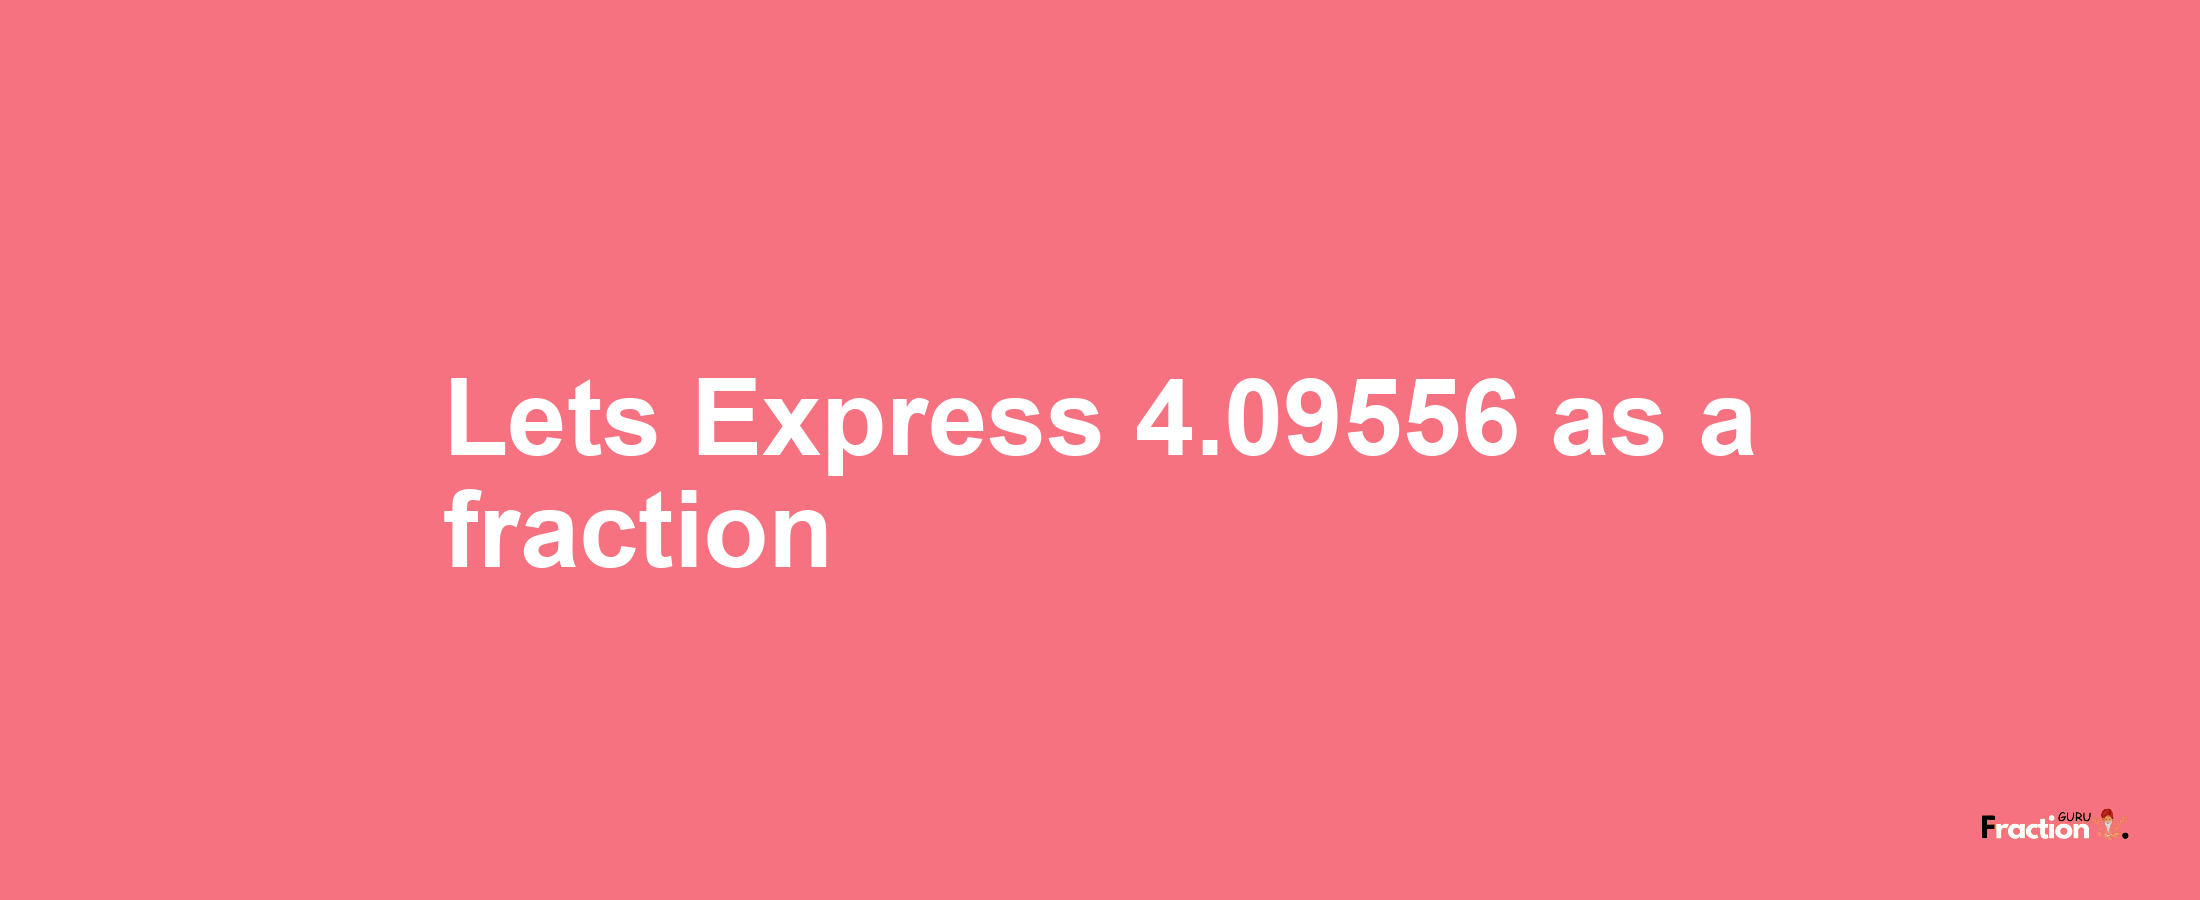 Lets Express 4.09556 as afraction